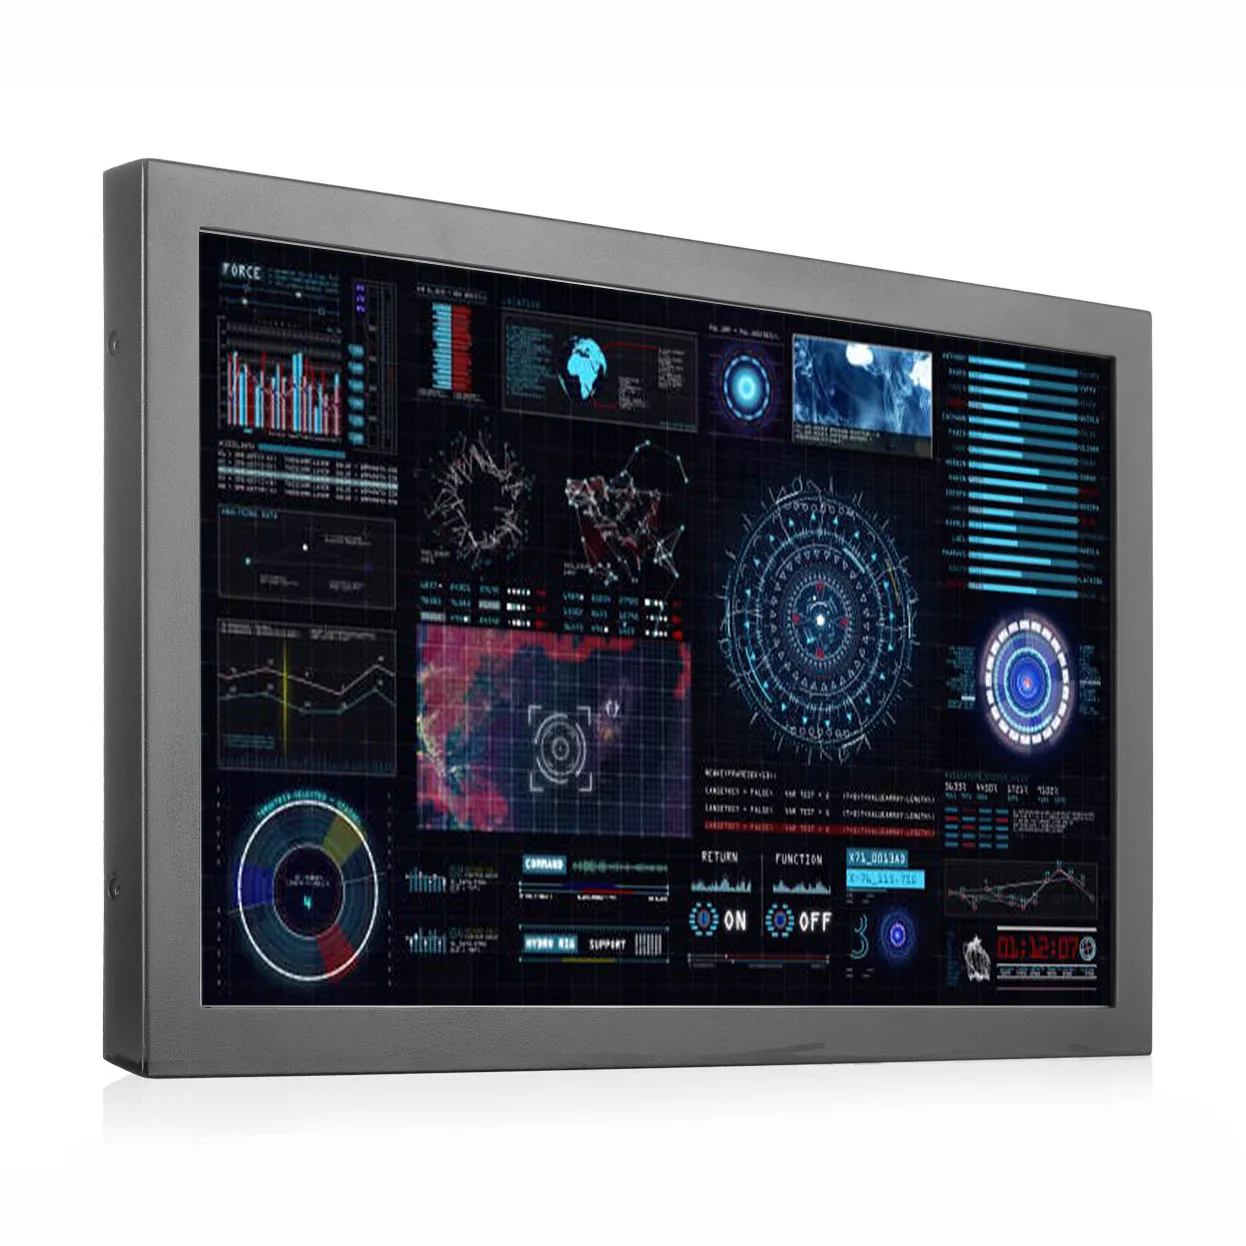 INDUSTRIAL OPEN FRAME TOUCH MONITOR KEETOUCH 15,6’’ KOT-0156U-SA4BP (KT-156-SRPS0M1)